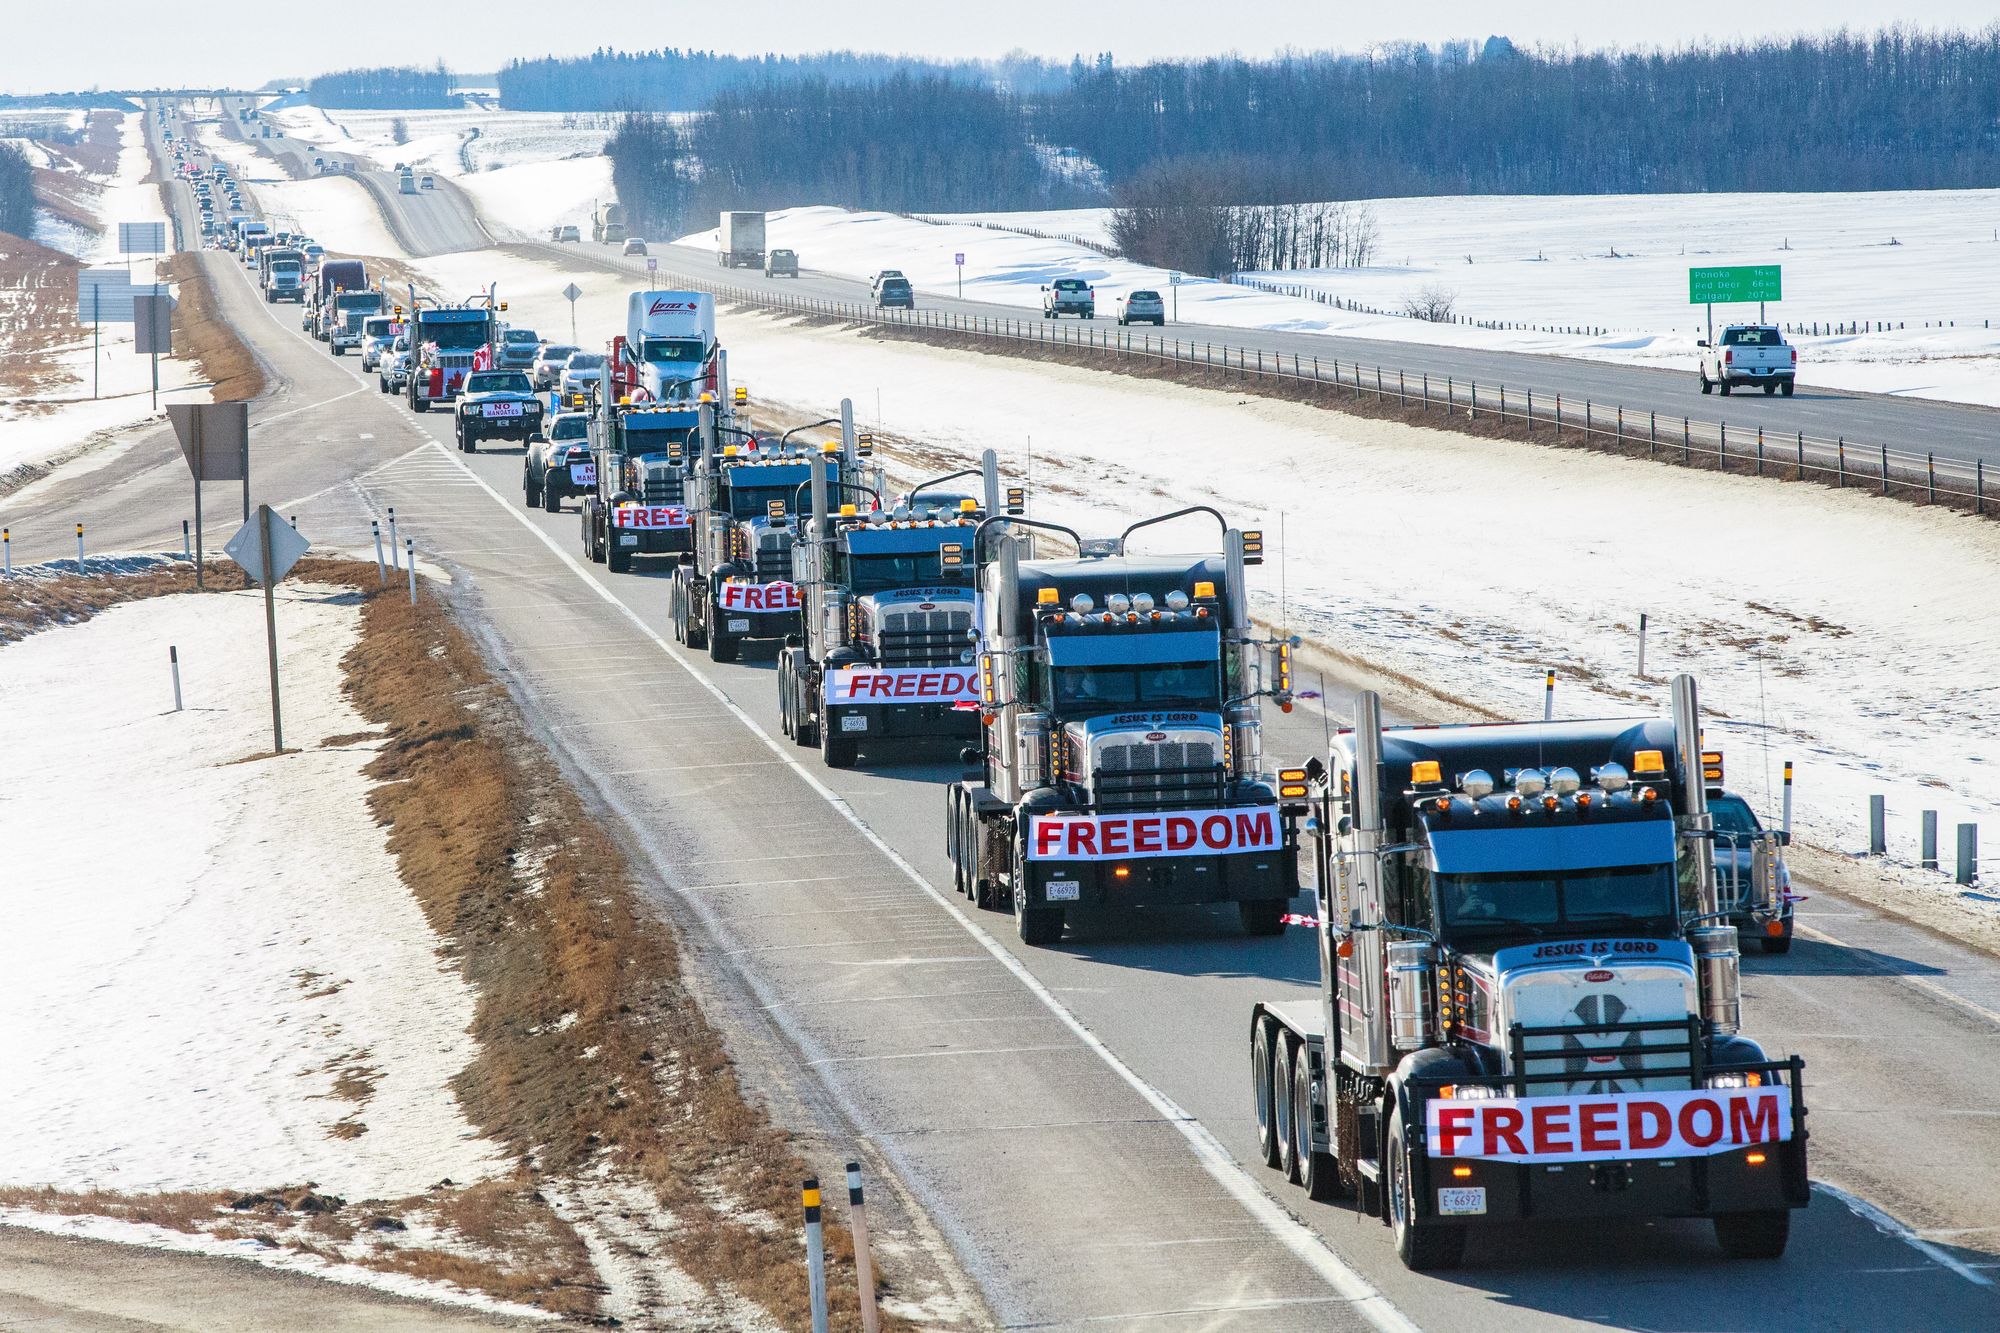 Podcast: Is The Freedom Convoy Going to Make a Comeback?